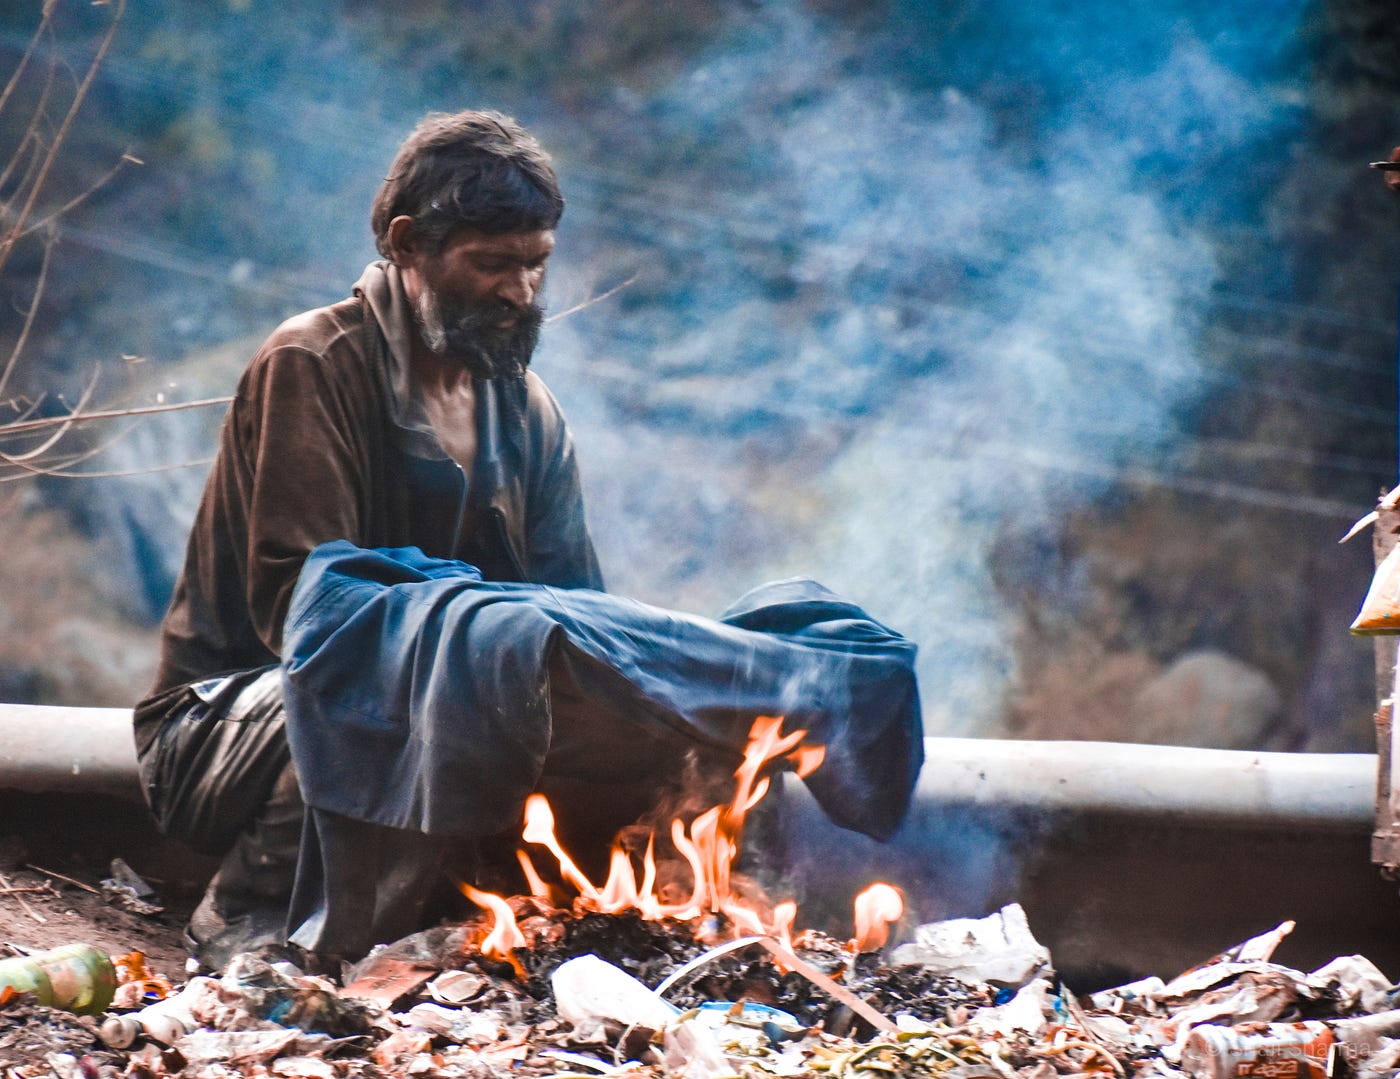 A poor man sitting by a fire.